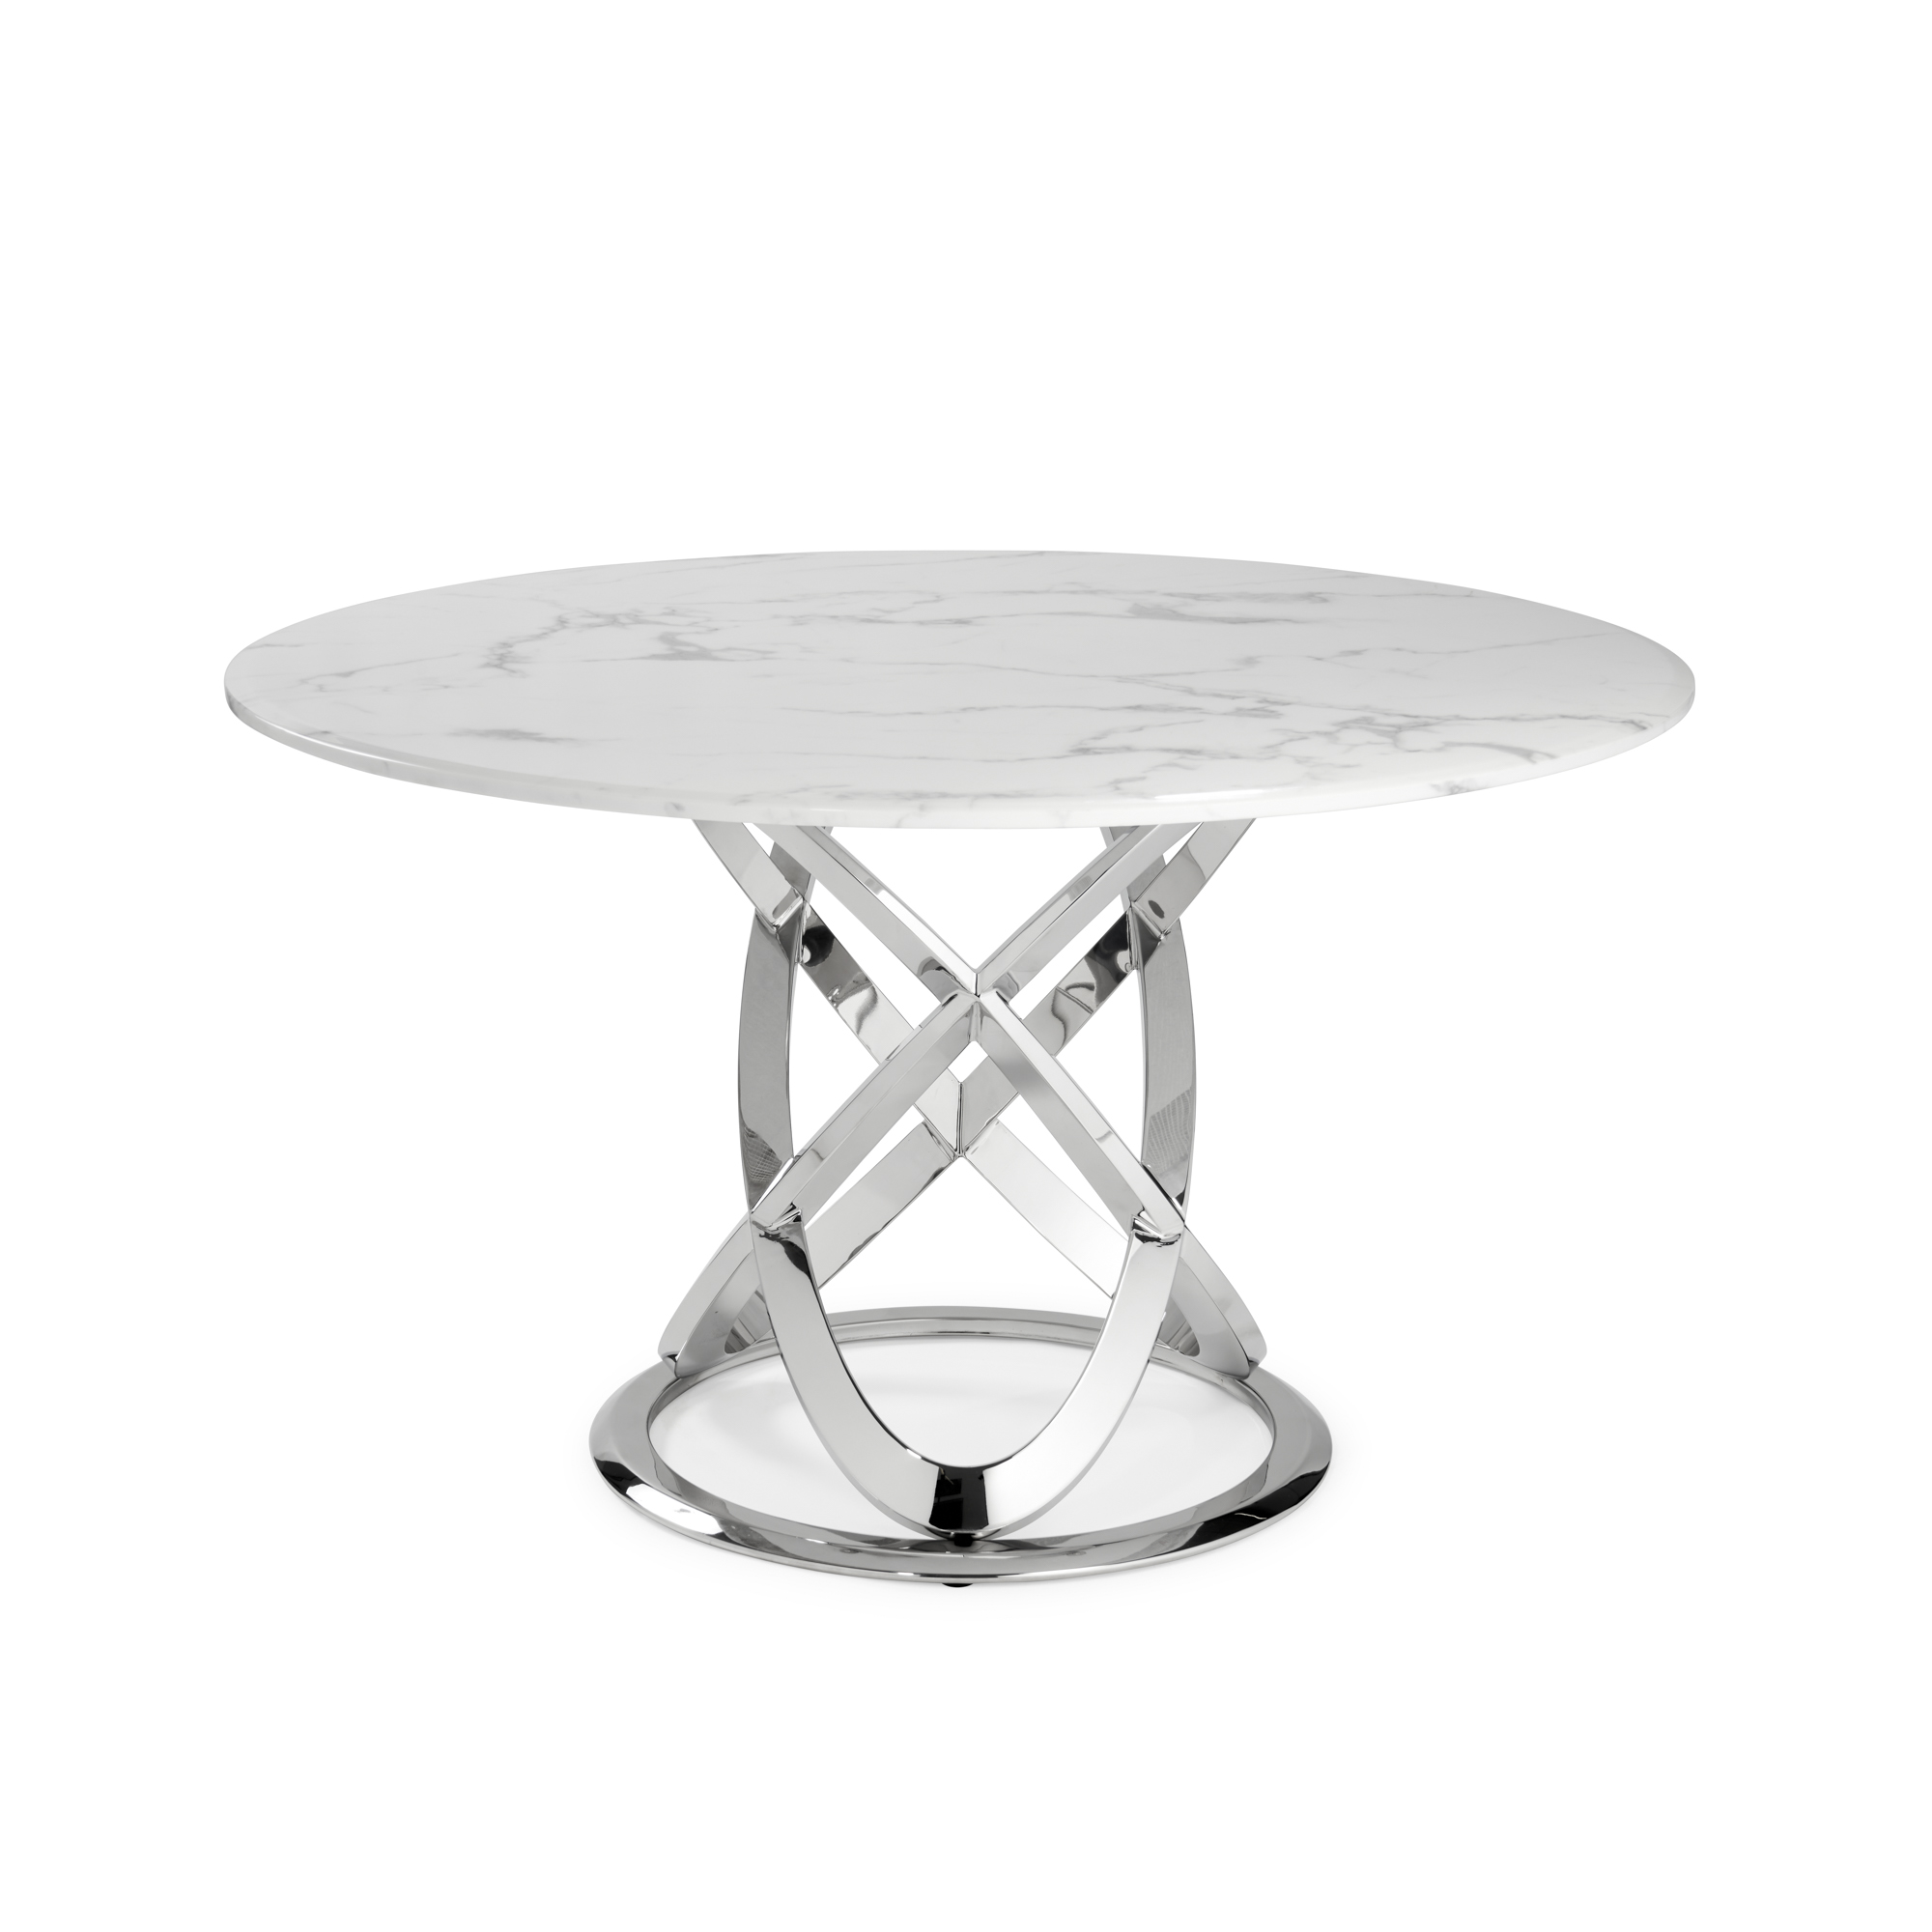 1.3M Pedestal Polished Circular Stainless Steel Dining Table with White Marble Top